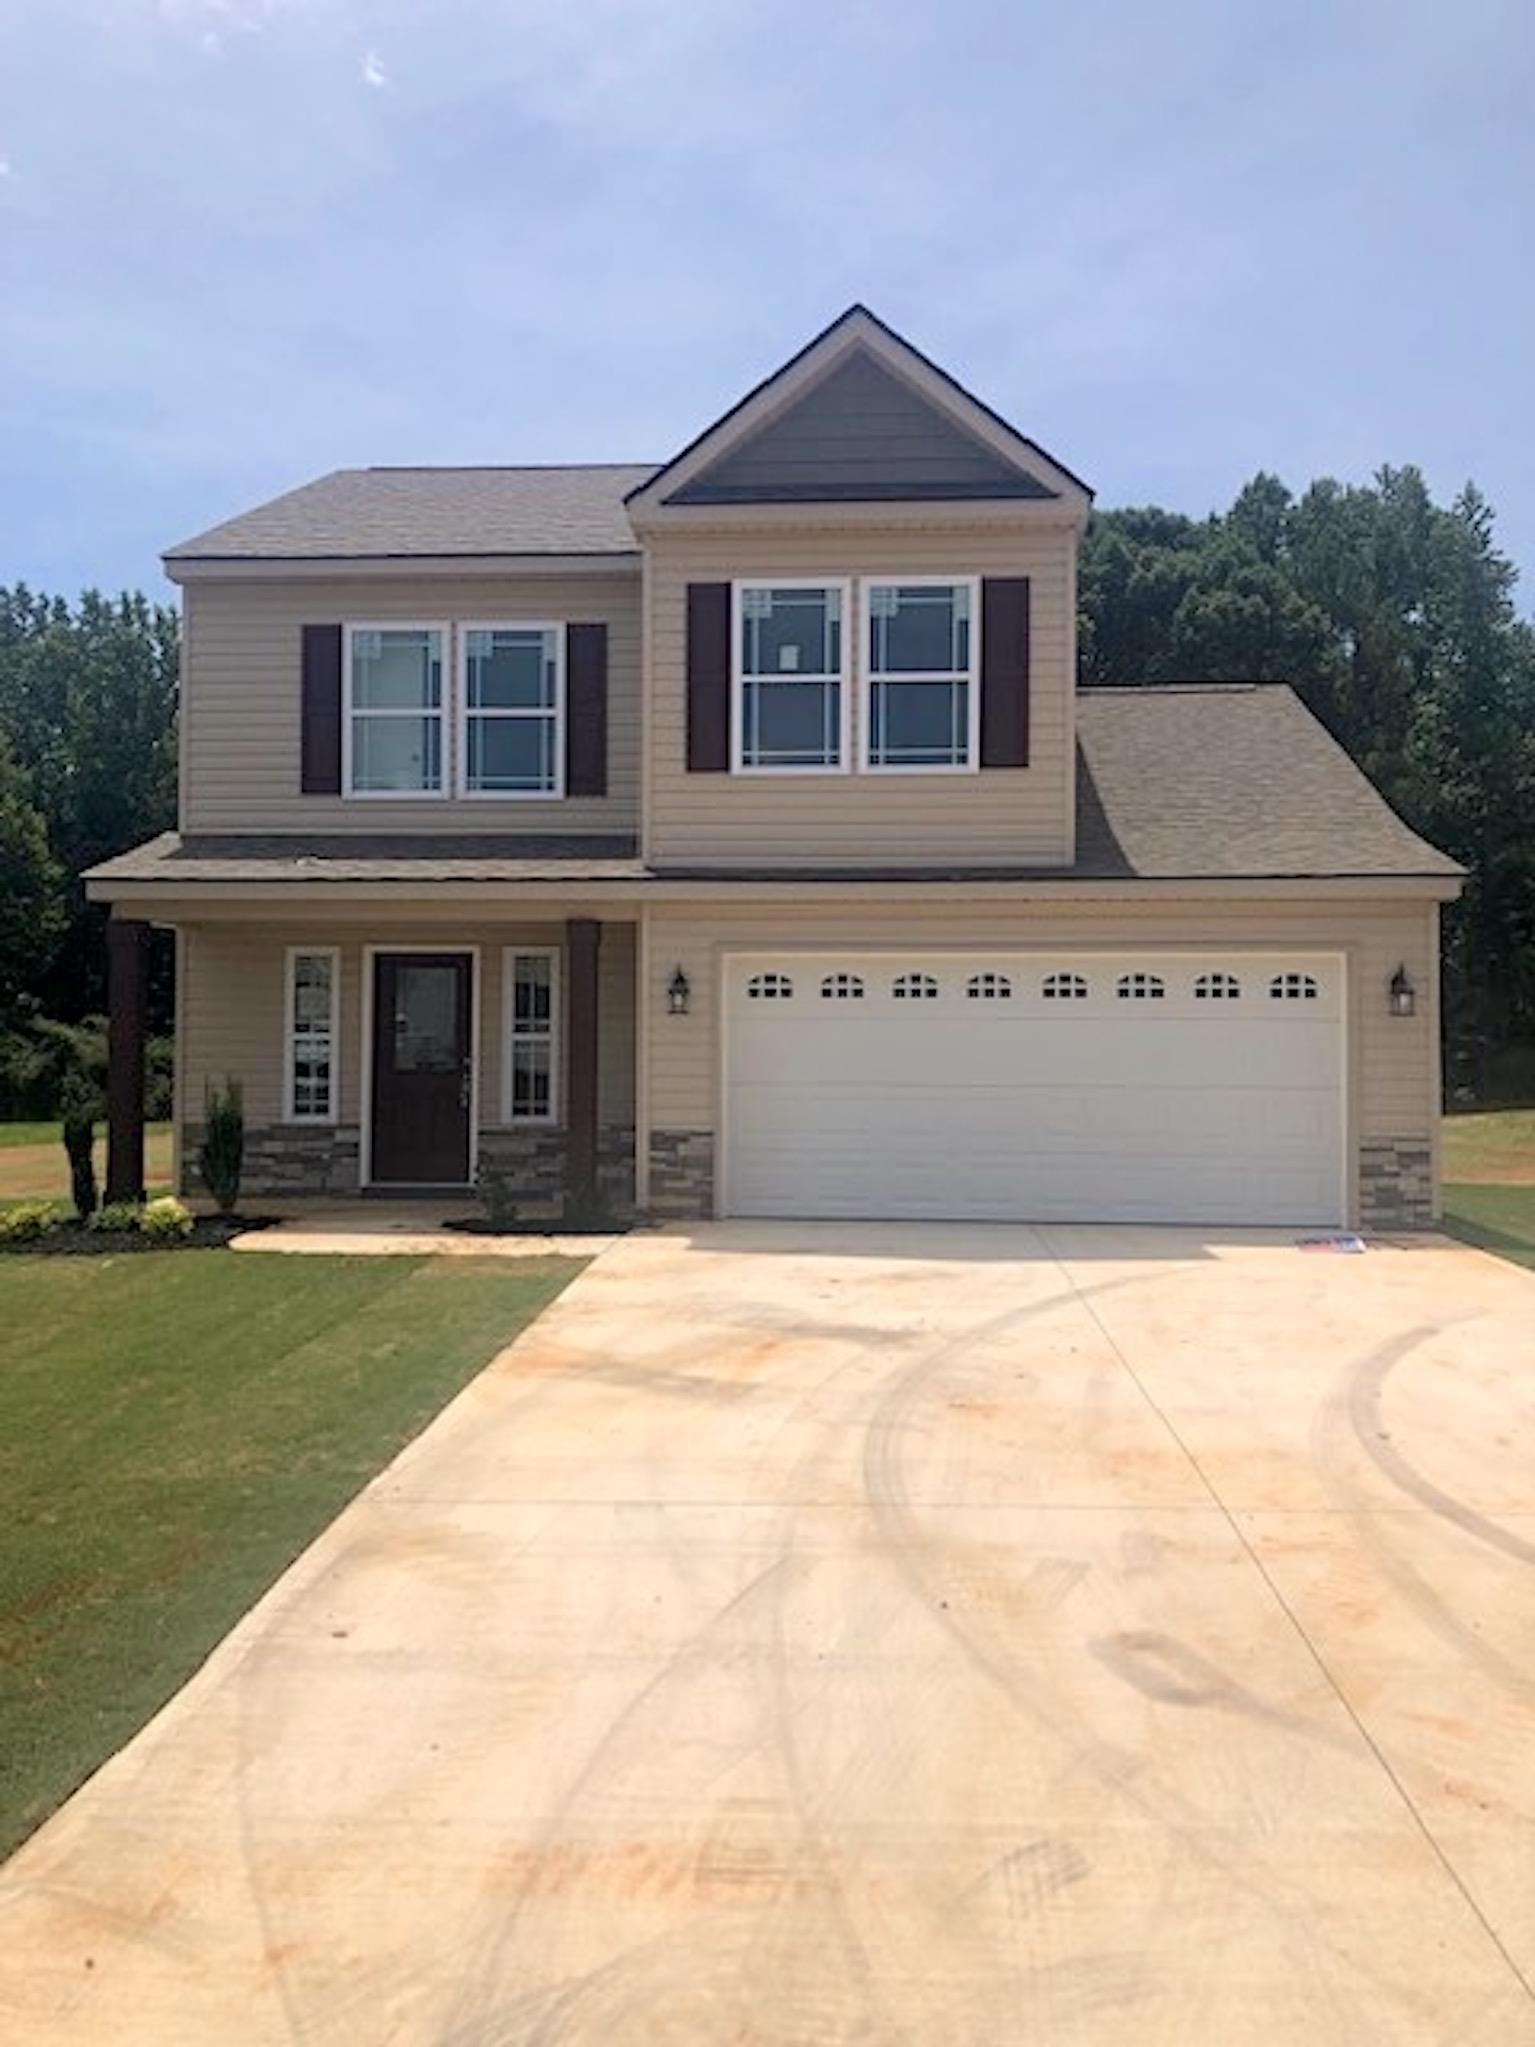 Reynolds plan! This 2 story 3br/2.5ba home features a gas fireplace, granite counter tops, 12'x12' covered patio and much more. Steuer Place is a new community with 100% financing available! This home is a must-see!  Preferred Lender/Attorney Closing Costs Incentive Offered!  1/2 acre Lot.